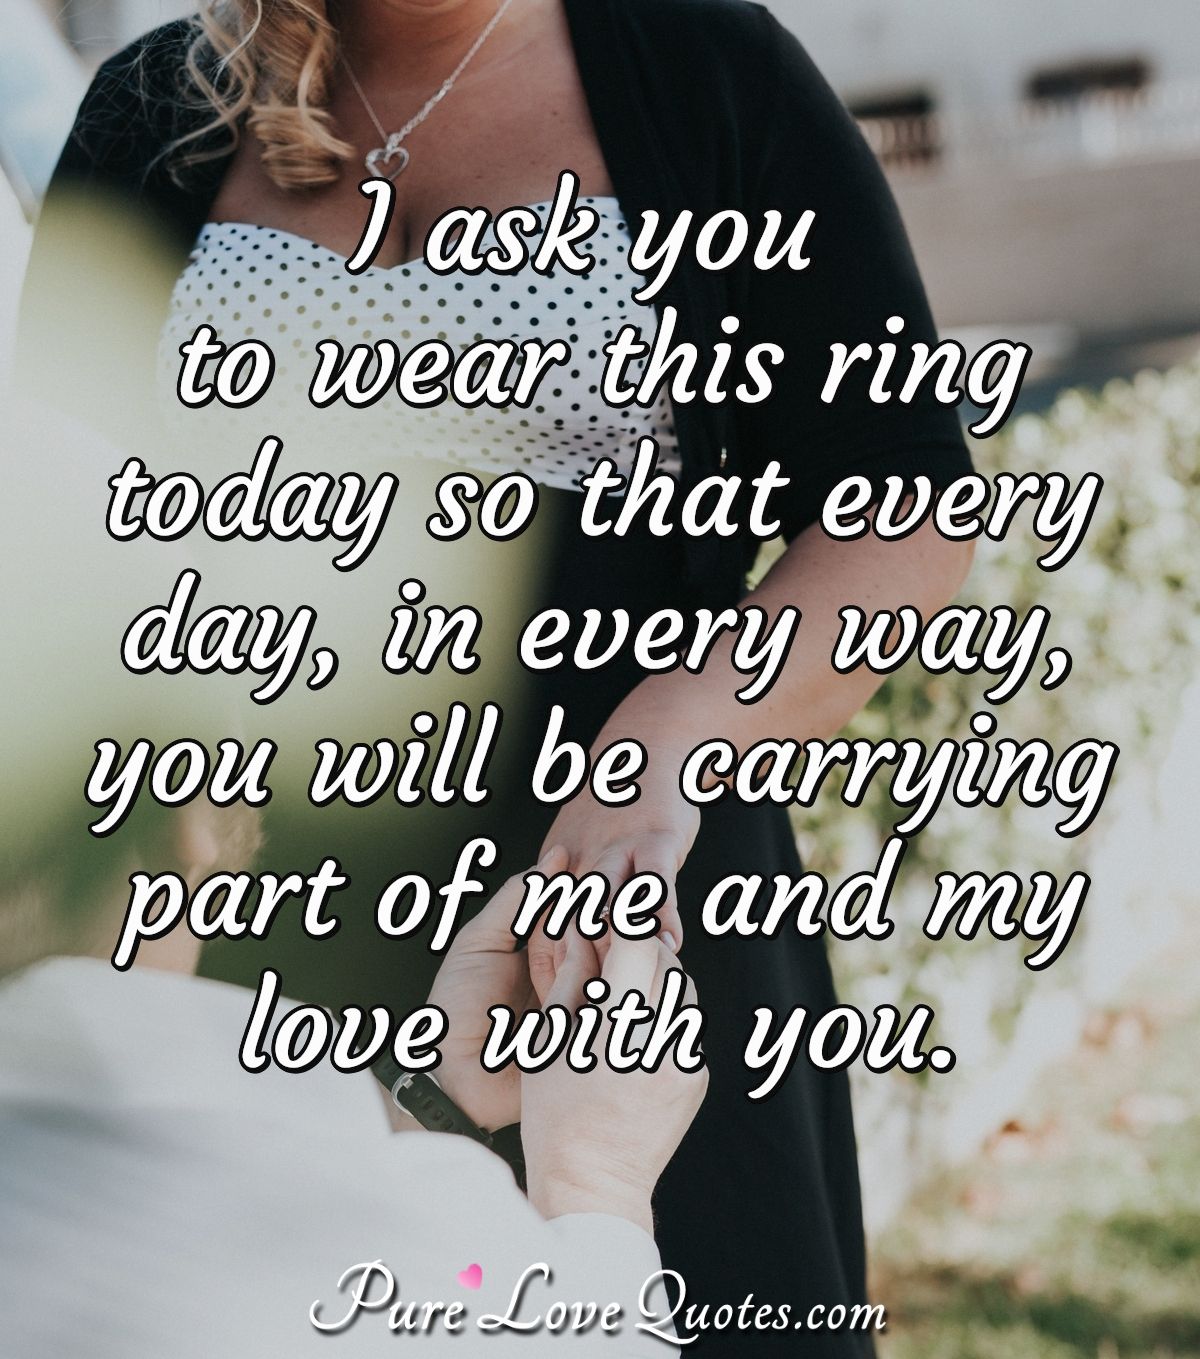 I ask you to wear this ring today so that every day, in every way, you will be carrying part of me and my love with you. - Anonymous